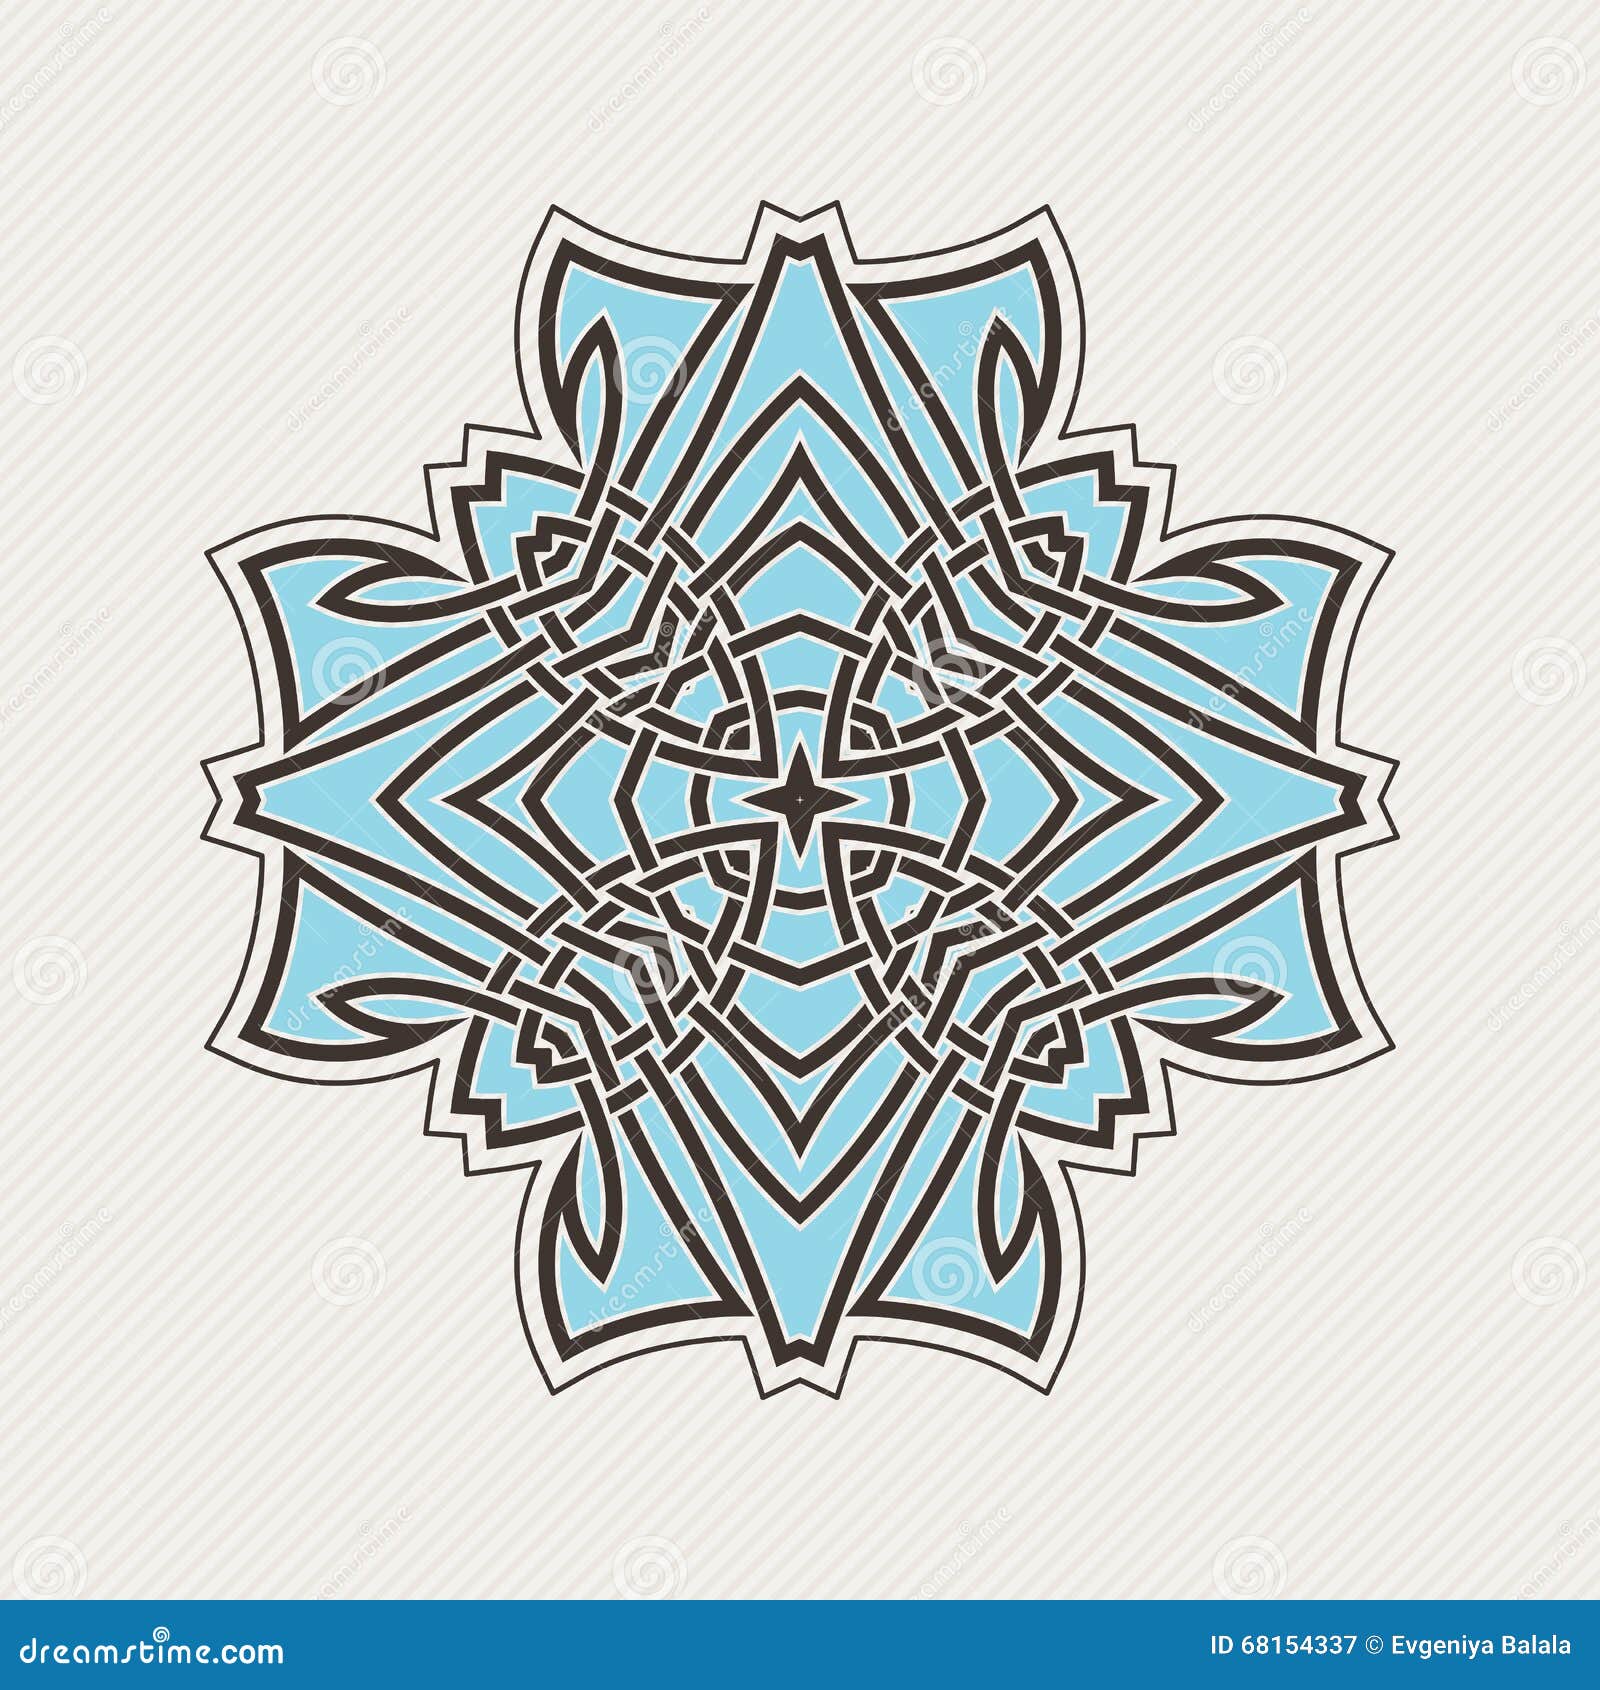 Download Vector Mandala. Gothic Lace Tattoo. Celtic Weave With ...